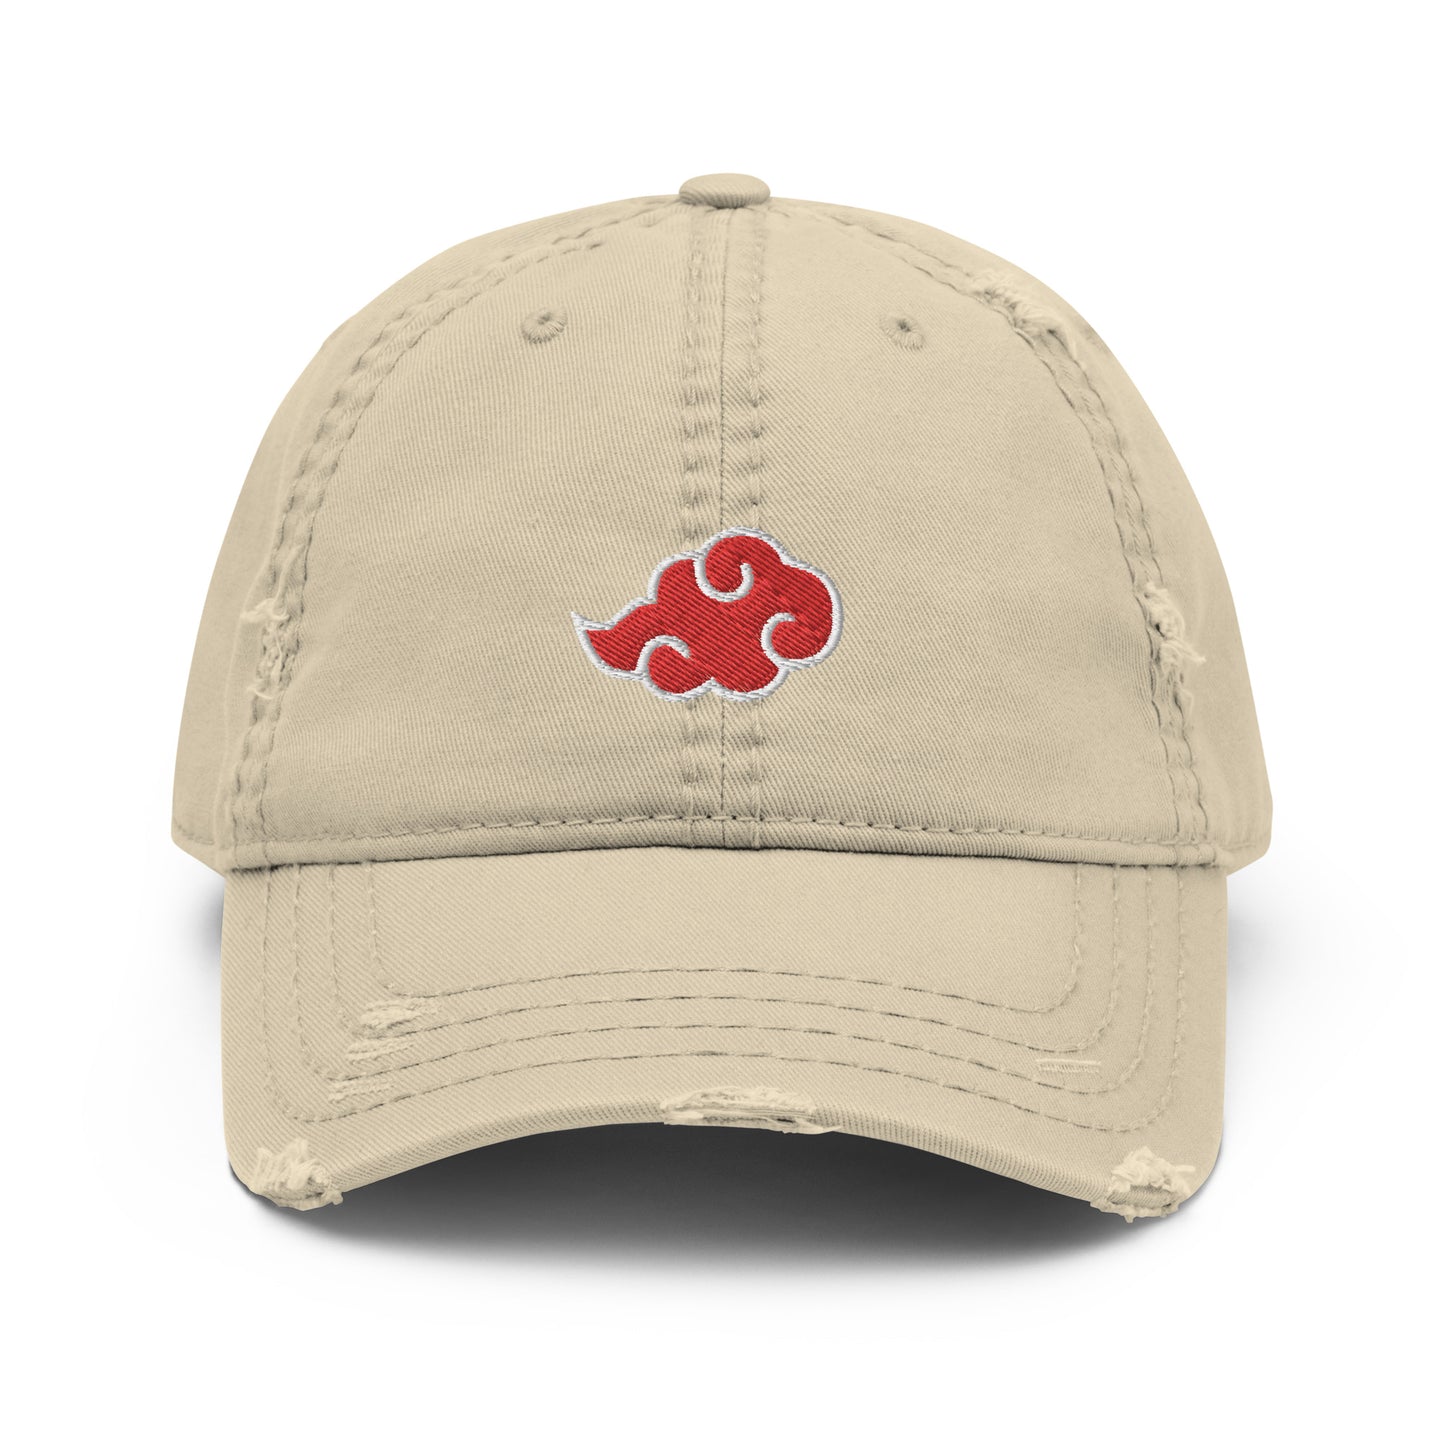 Anime Cloud Embroidered Distressed Dad Hat